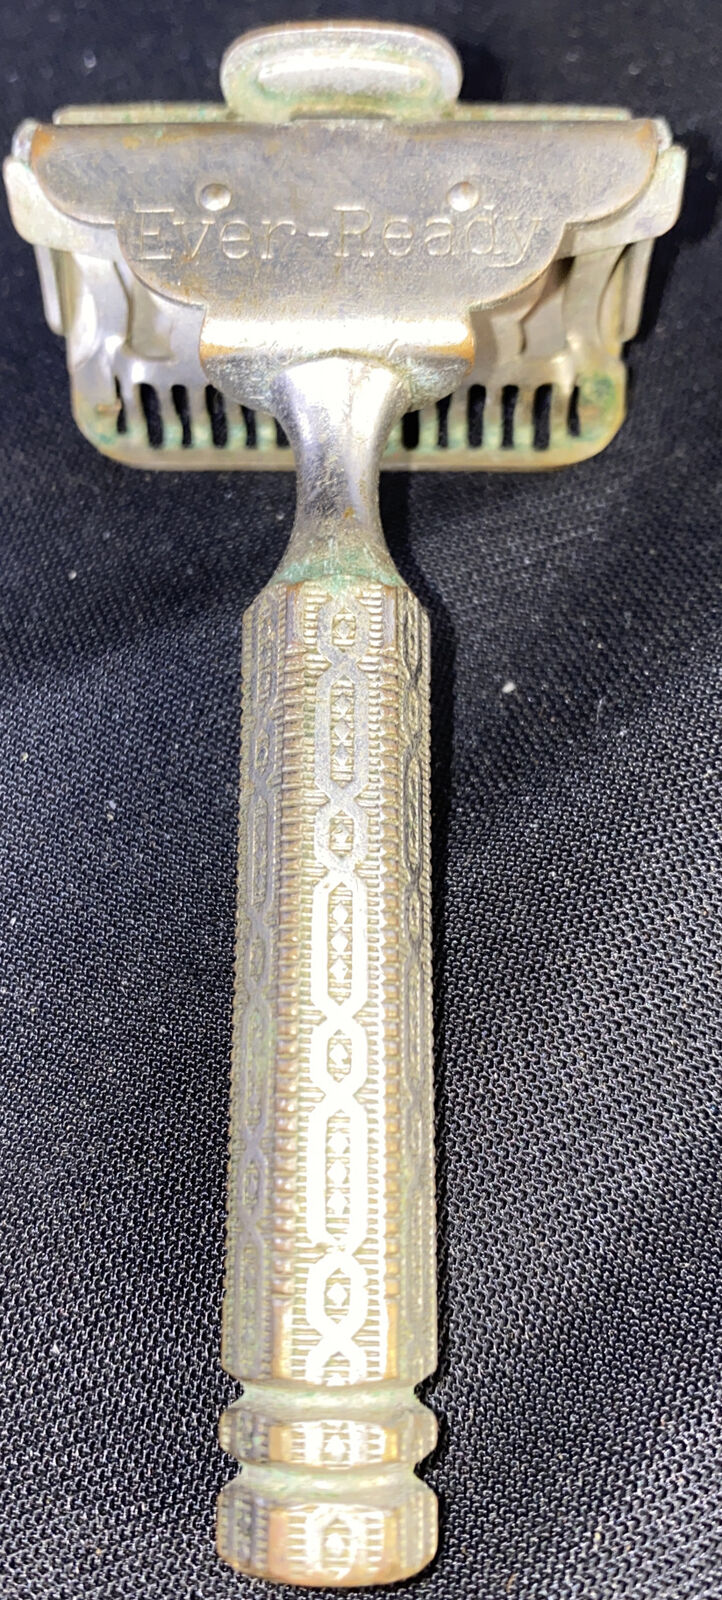 Vintage Ever-Ready Singe Edge Safety Razor PAT’D 1912 made in USA